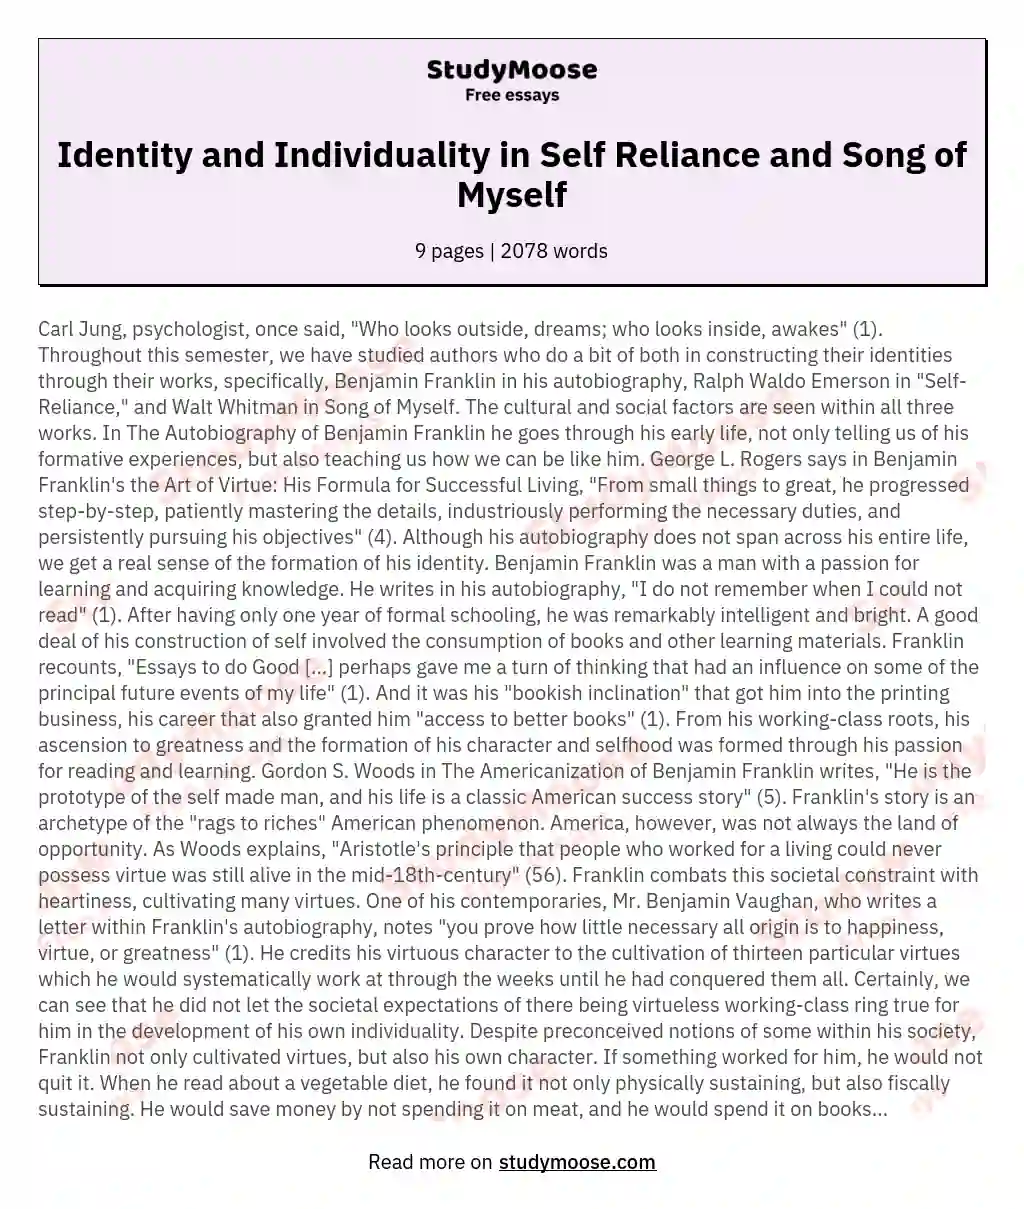 Identity and Individuality in Ralph Waldo's Essay "Self Reliance" and Walt Whitman's "Song of Myself"